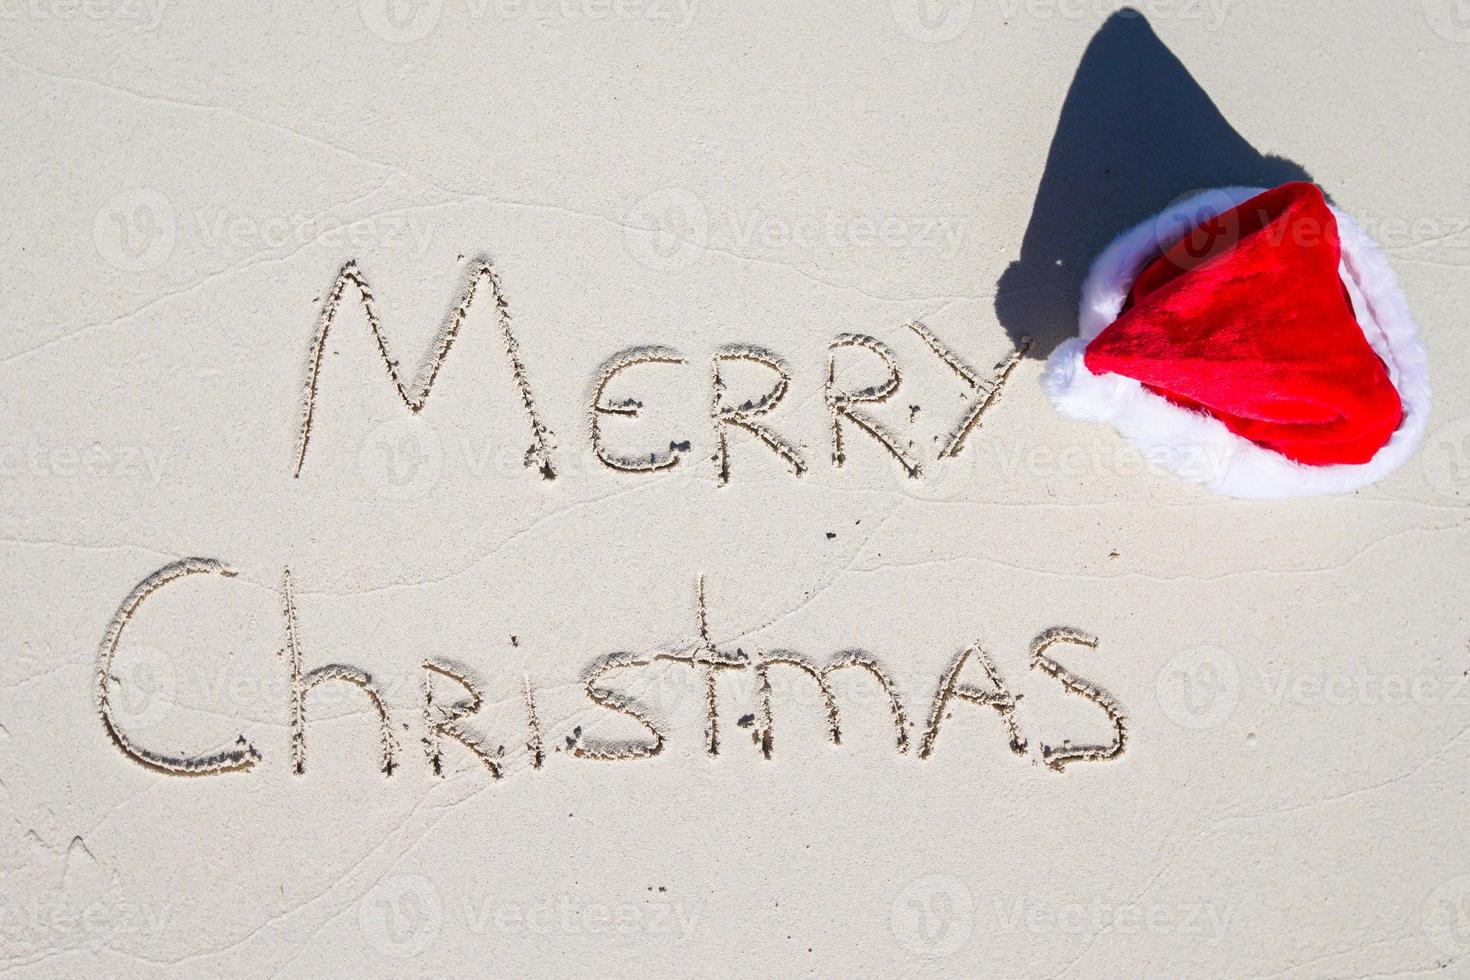 Merry Christmas written on tropical beach white sand with xmas hat photo